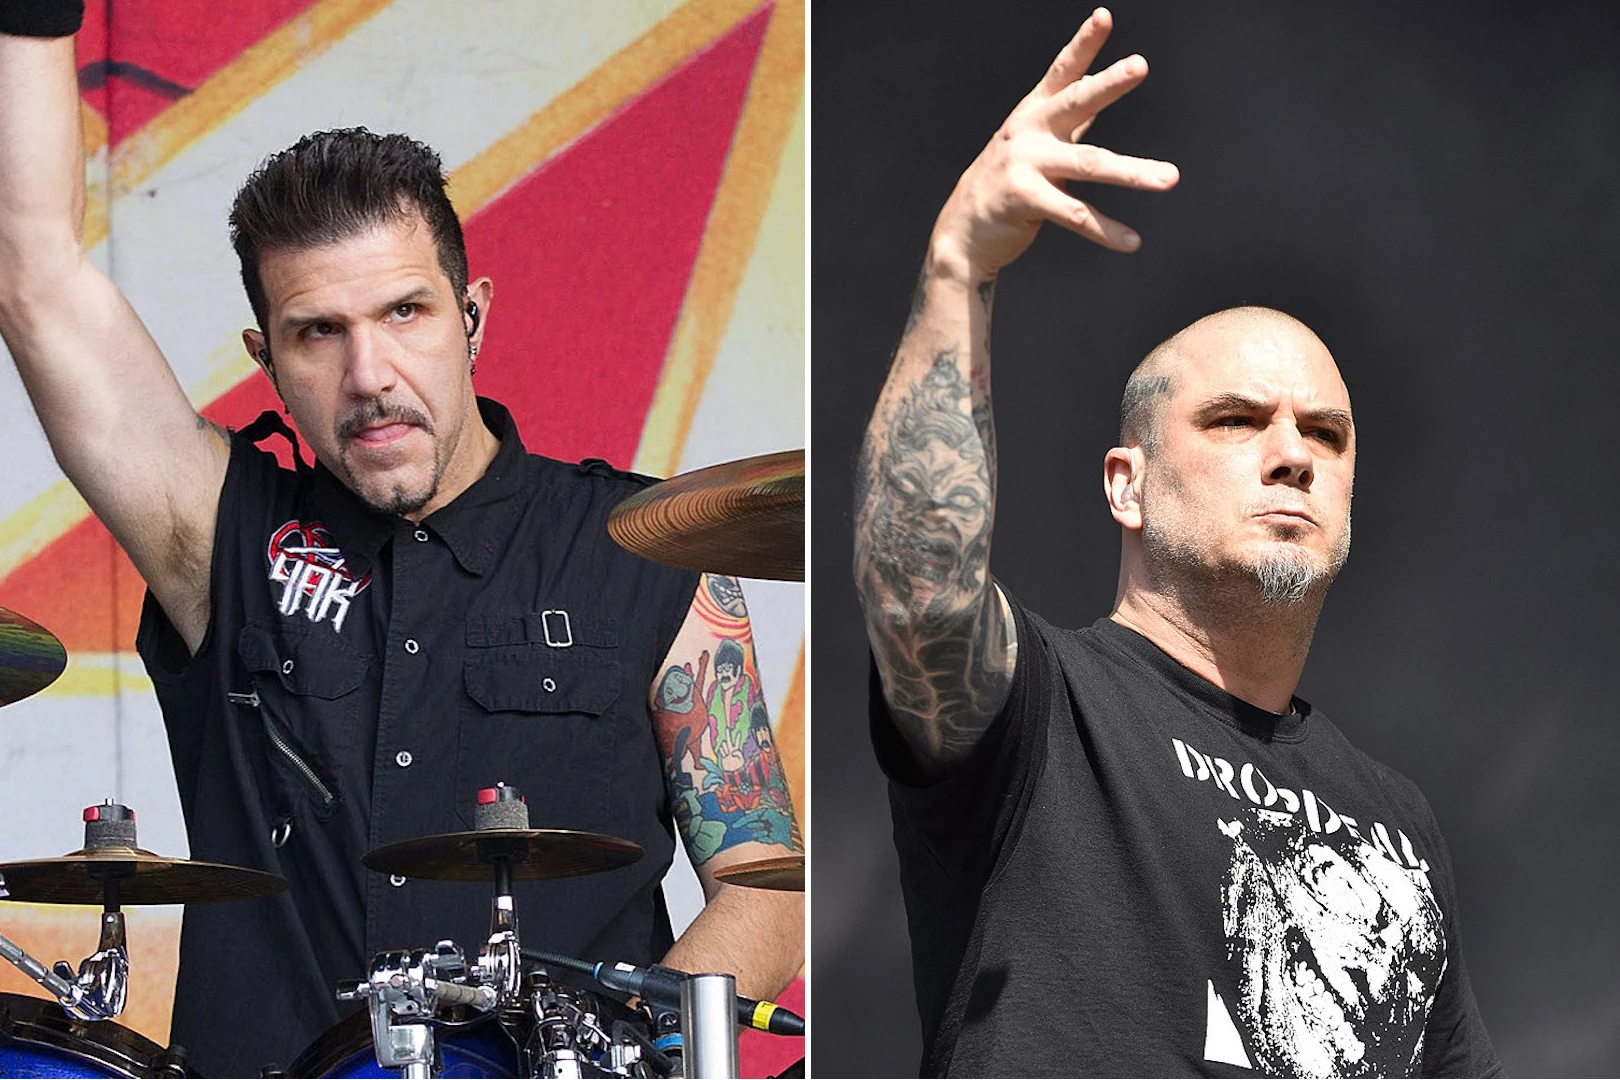 Charlie Benante Details Phone Call When Asked to Join Pantera